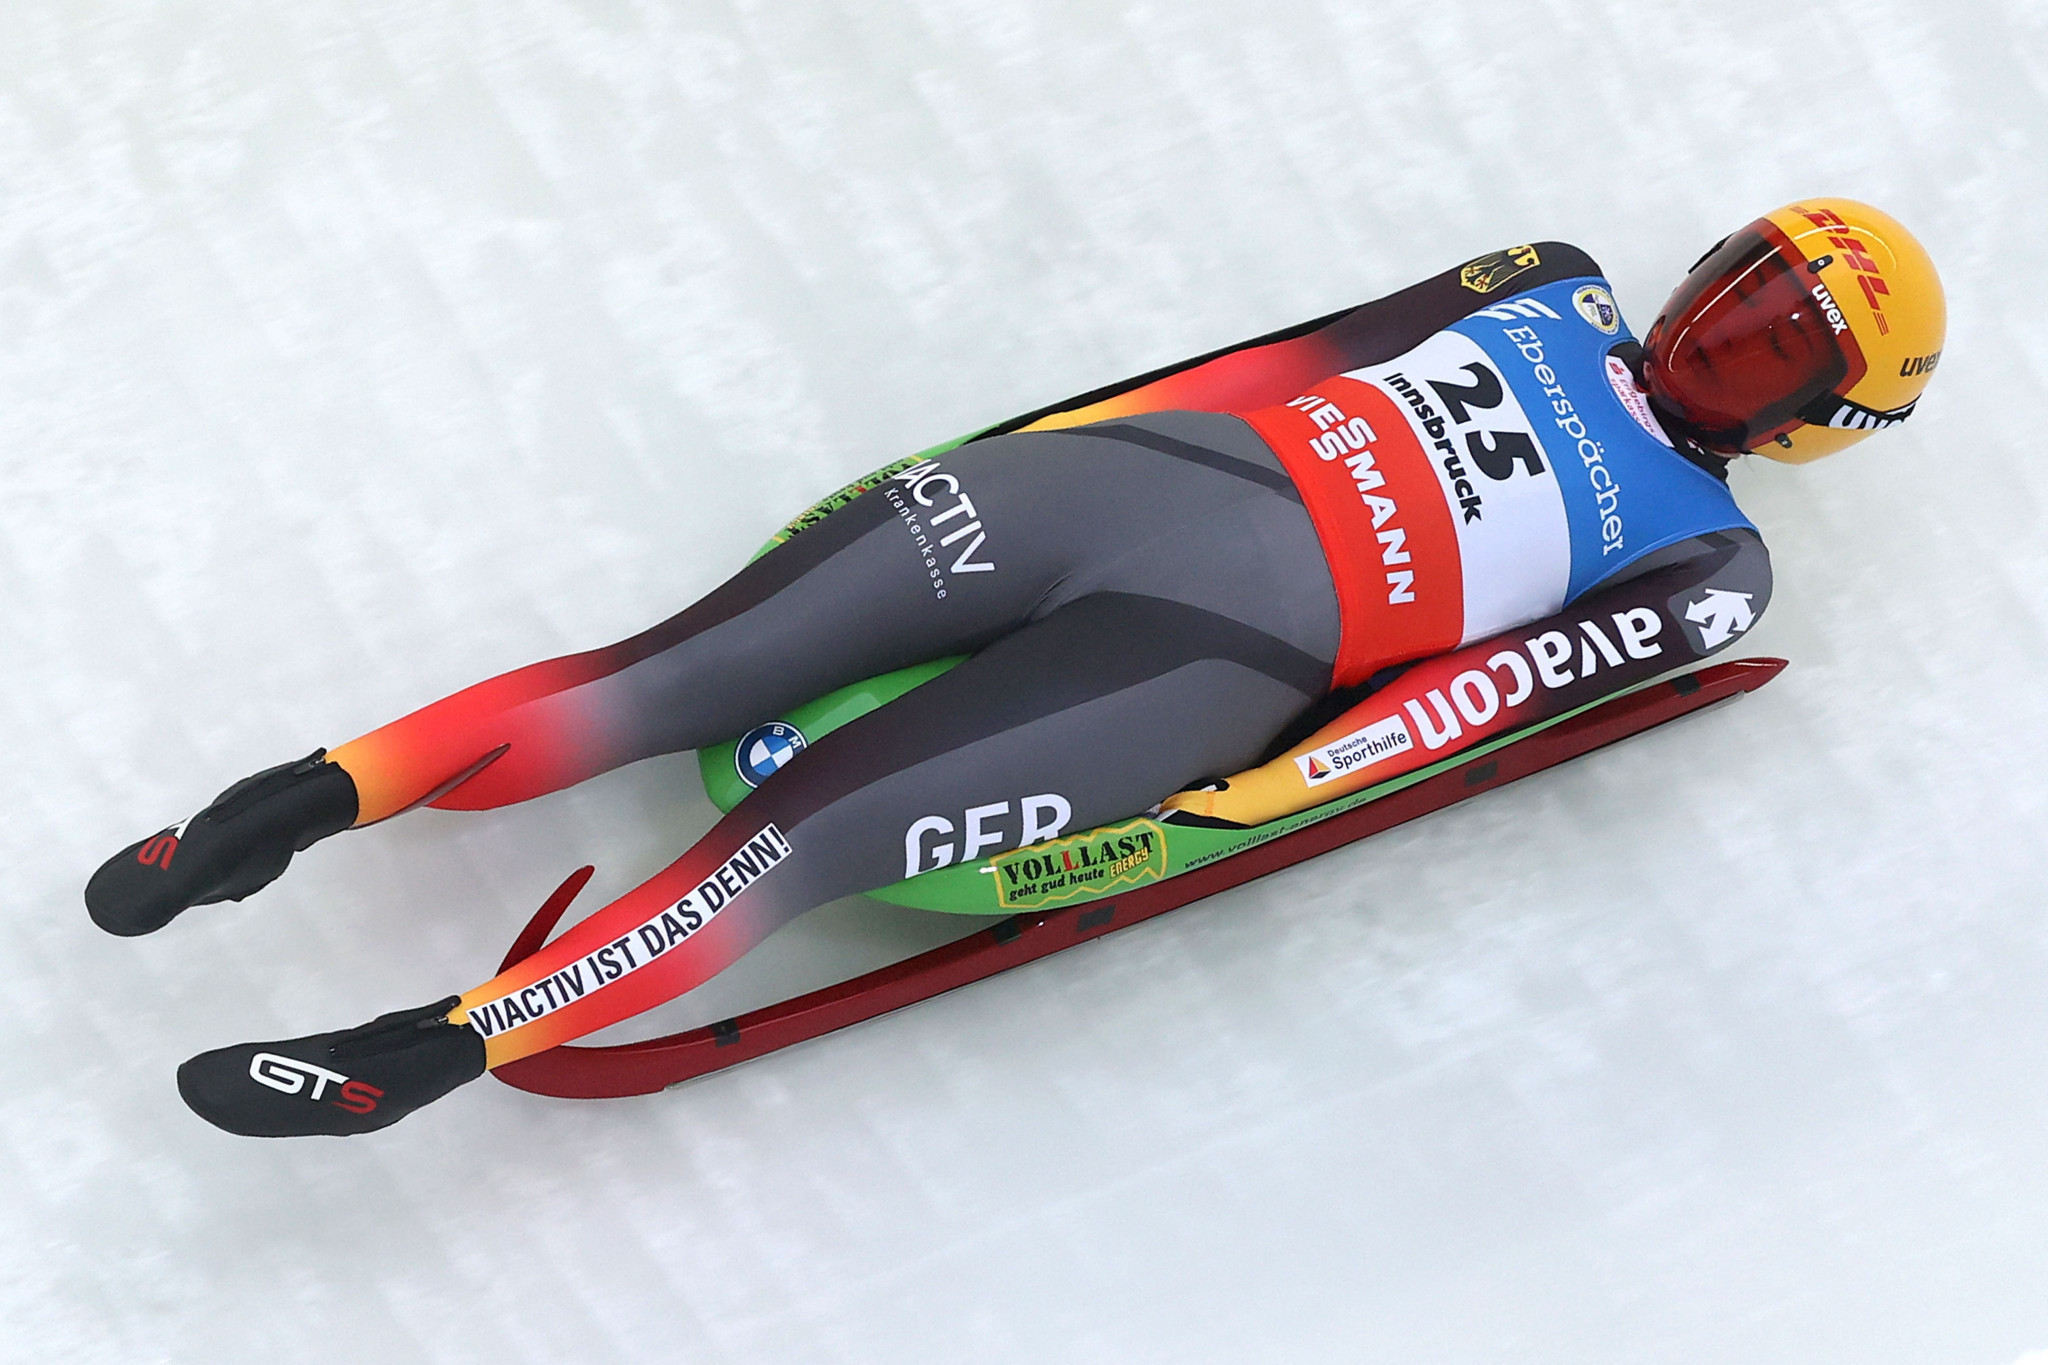 Taubitz and Ludwig looking to extend leads at Luge World Cup